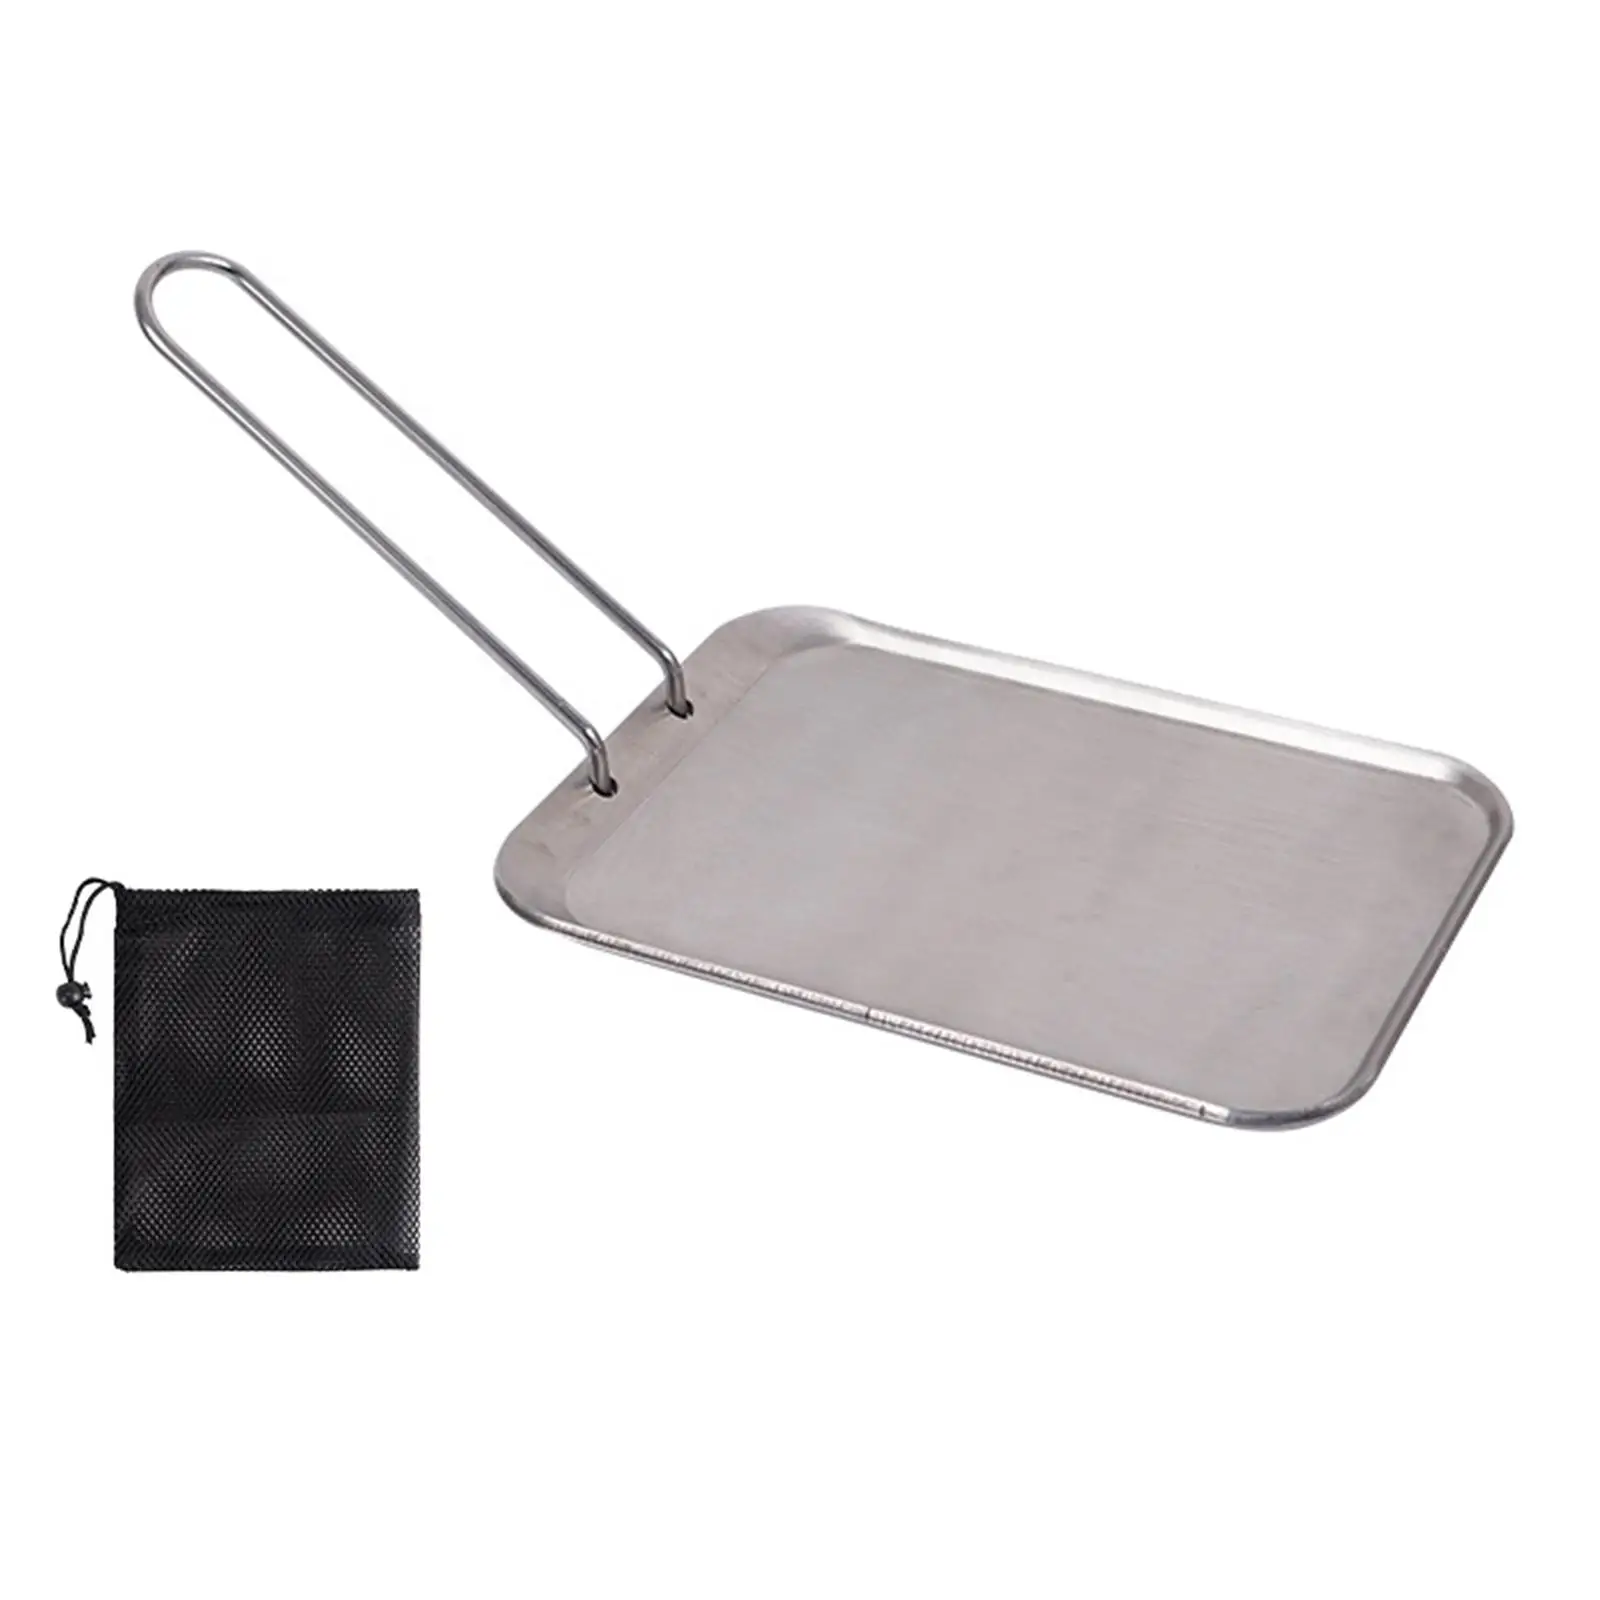 Frying Pan Griddle Indoor Outdoor Cookware Grill BBQ Pan for Stoves Tops